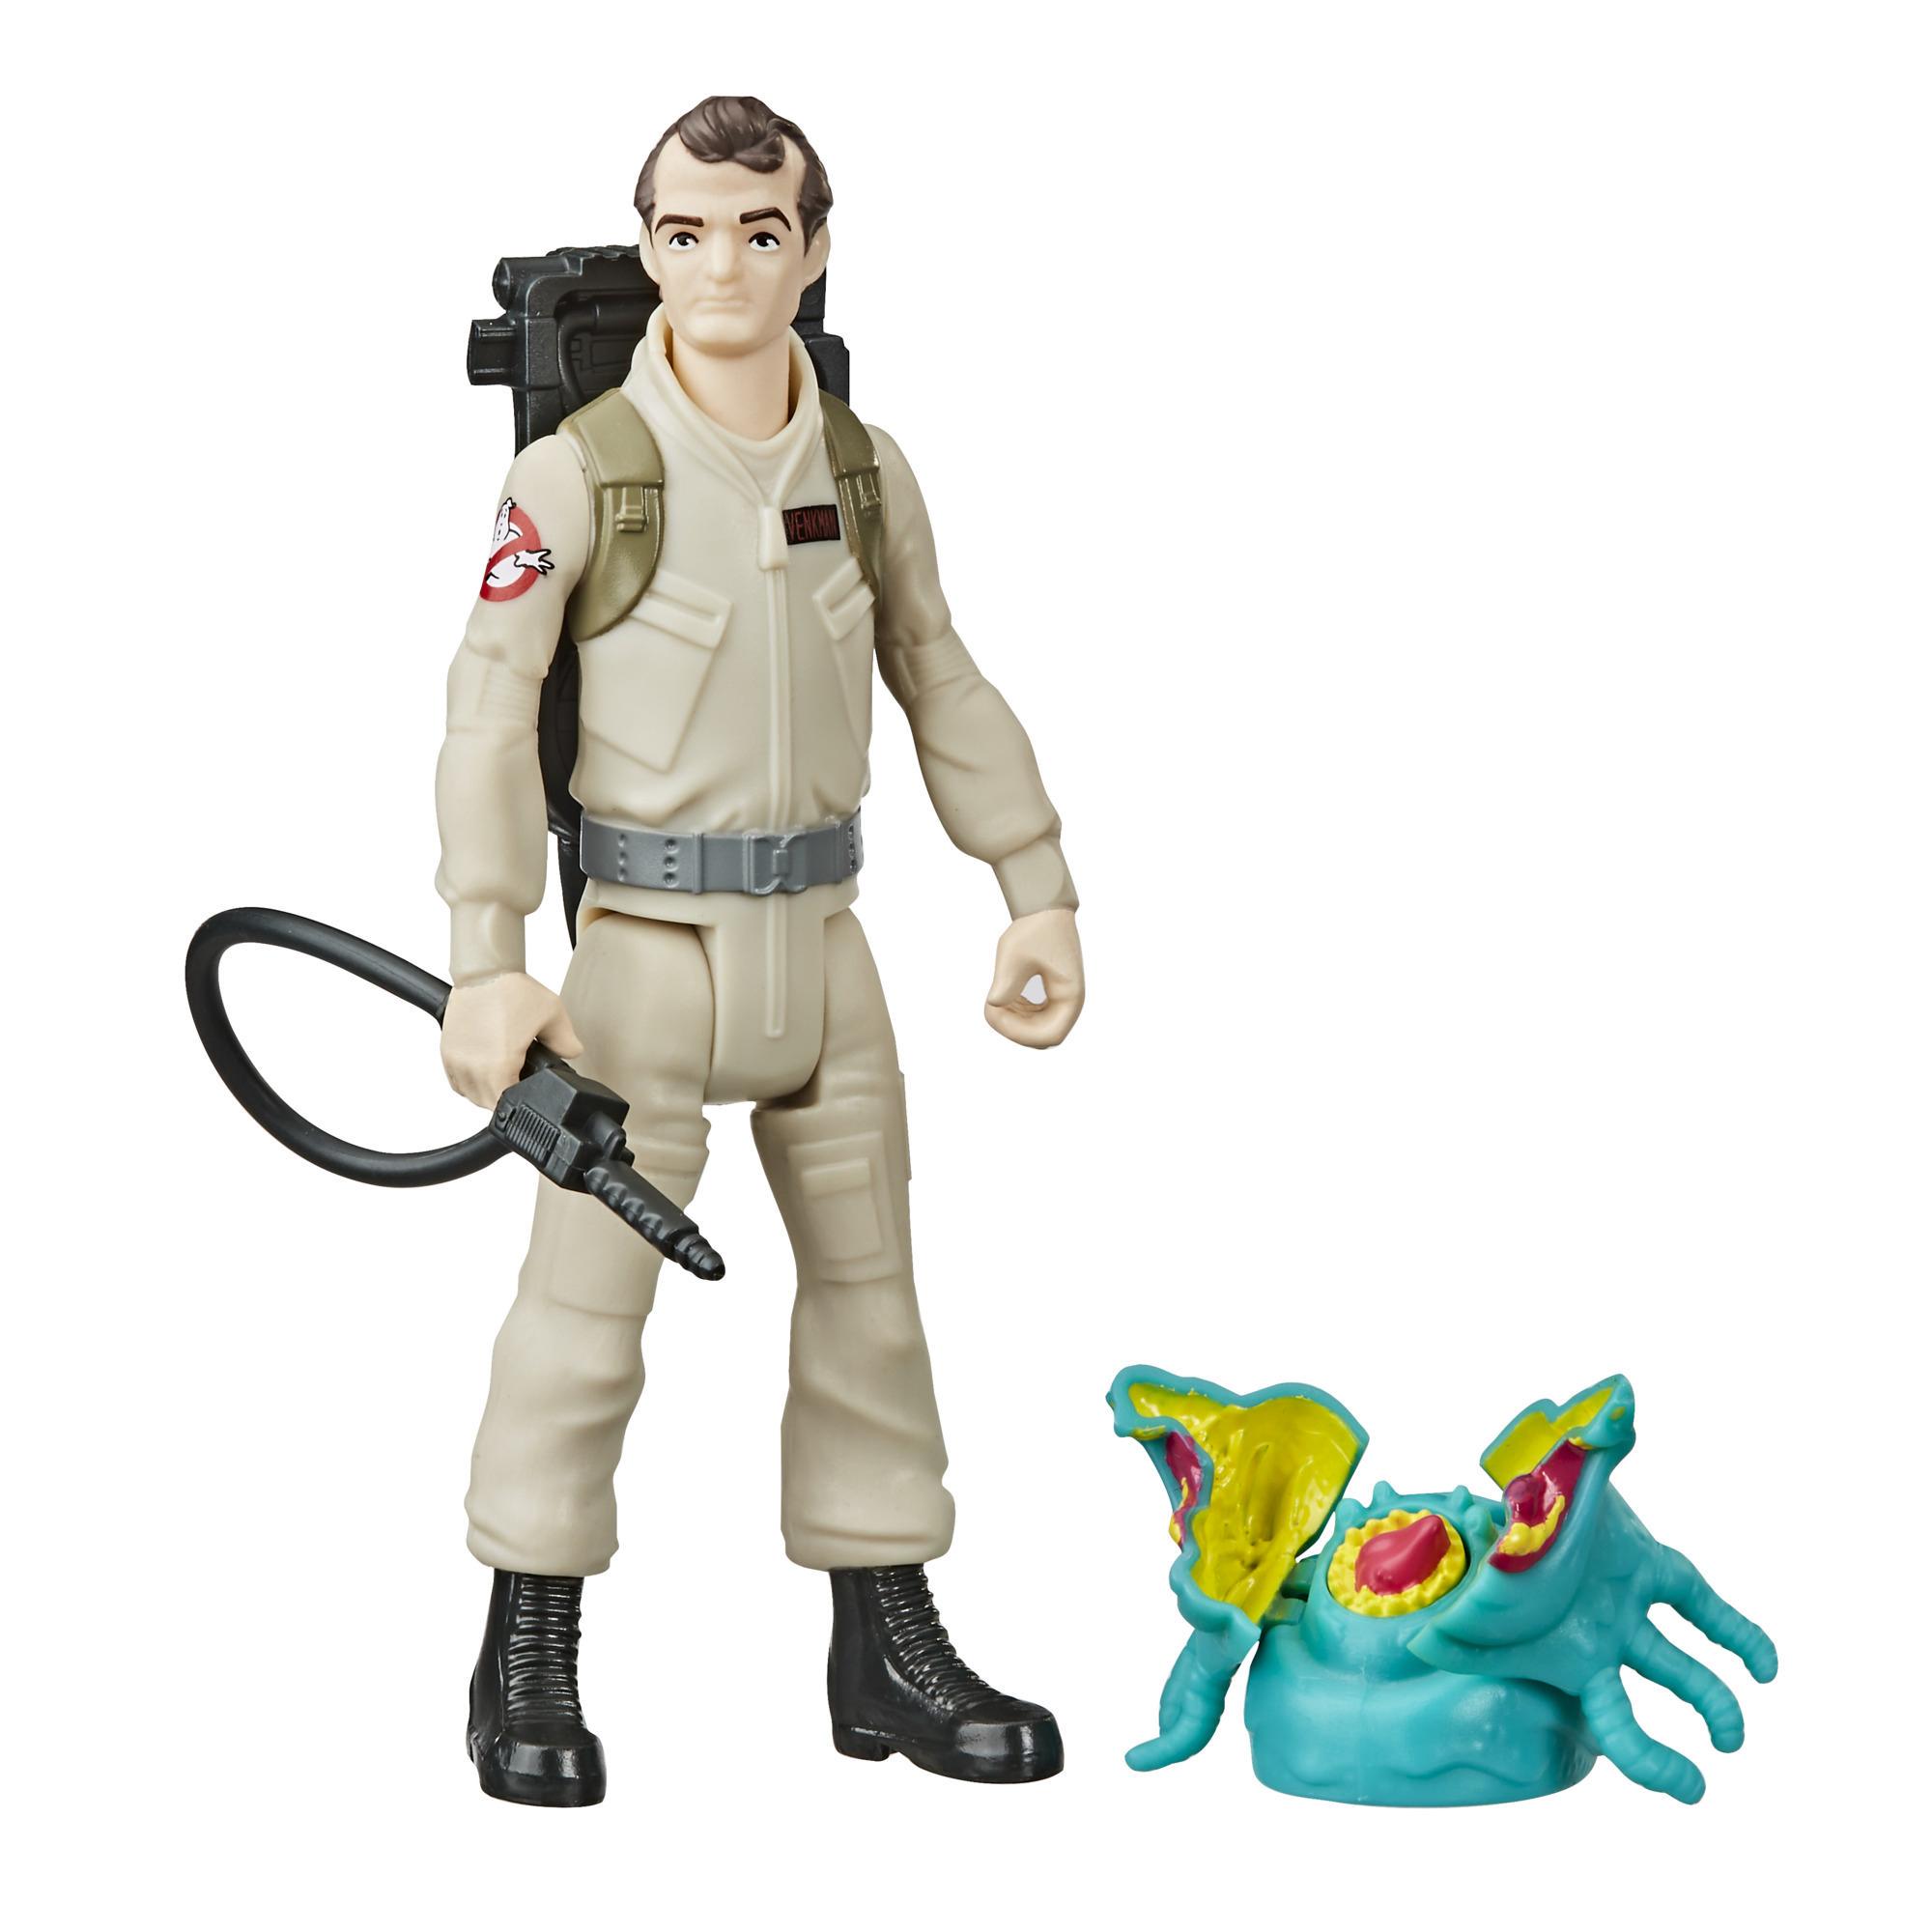 Ghostbusters Fright Features Peter Venkman Figure with Interactive Ghost Figure and Accessory for Kids Ages 4 and Up product thumbnail 1